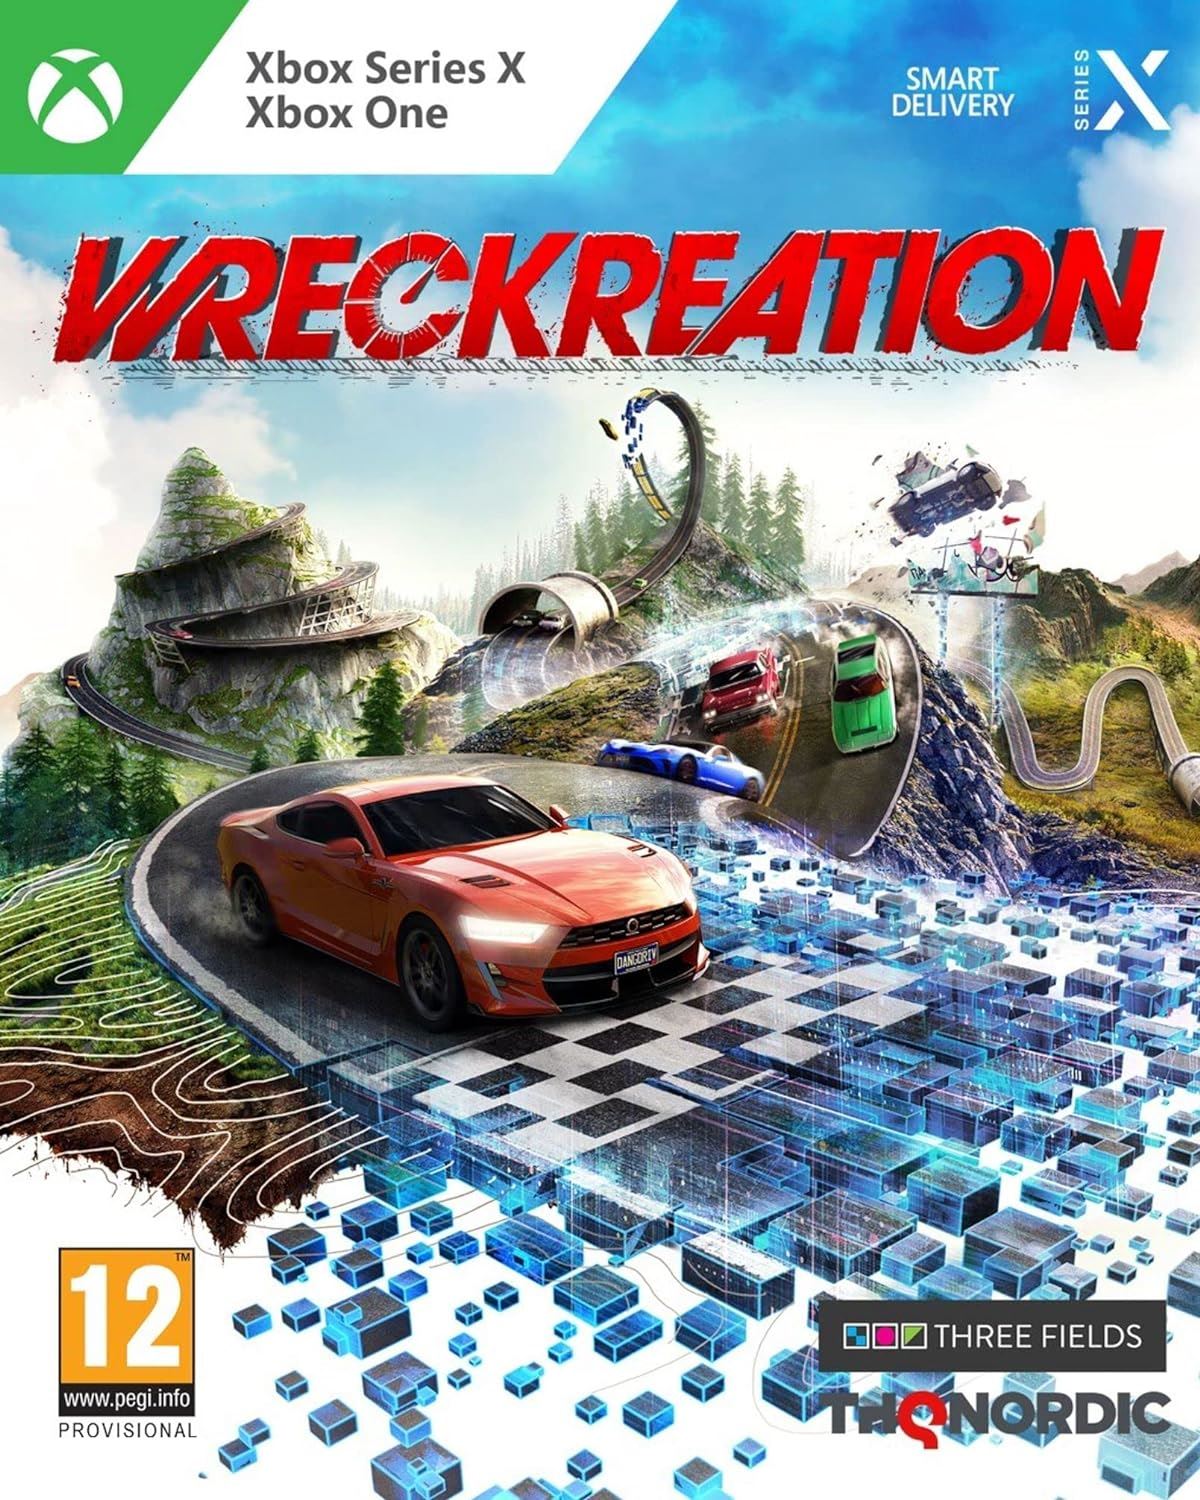 Wreckreation Xbox Series X Game